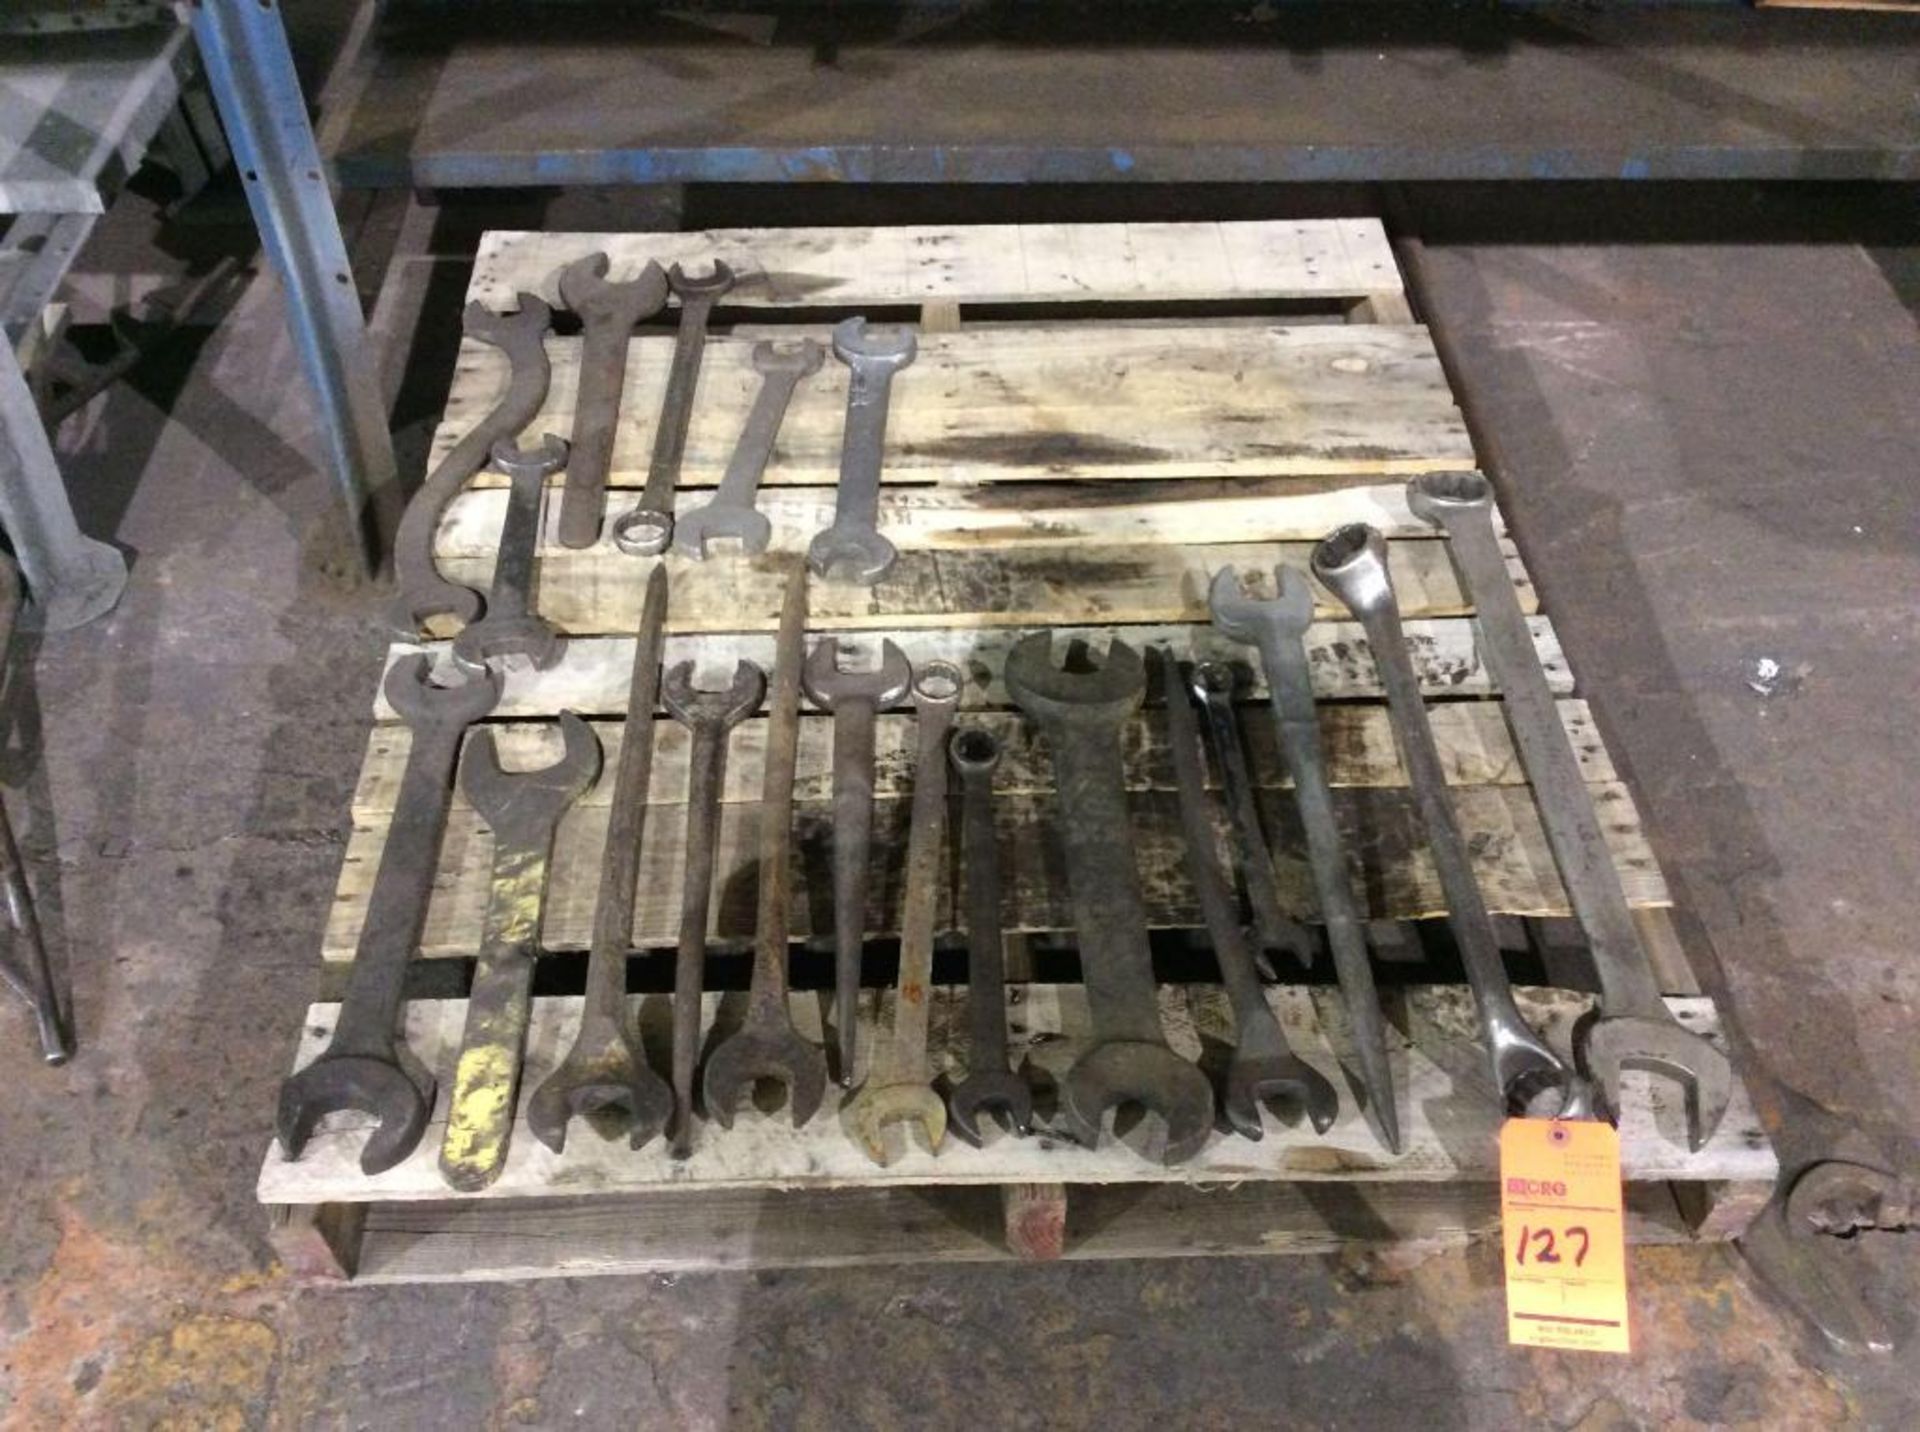 Lot of asst hand tools including wrenches, bottle jacks, sledge hammers, etc